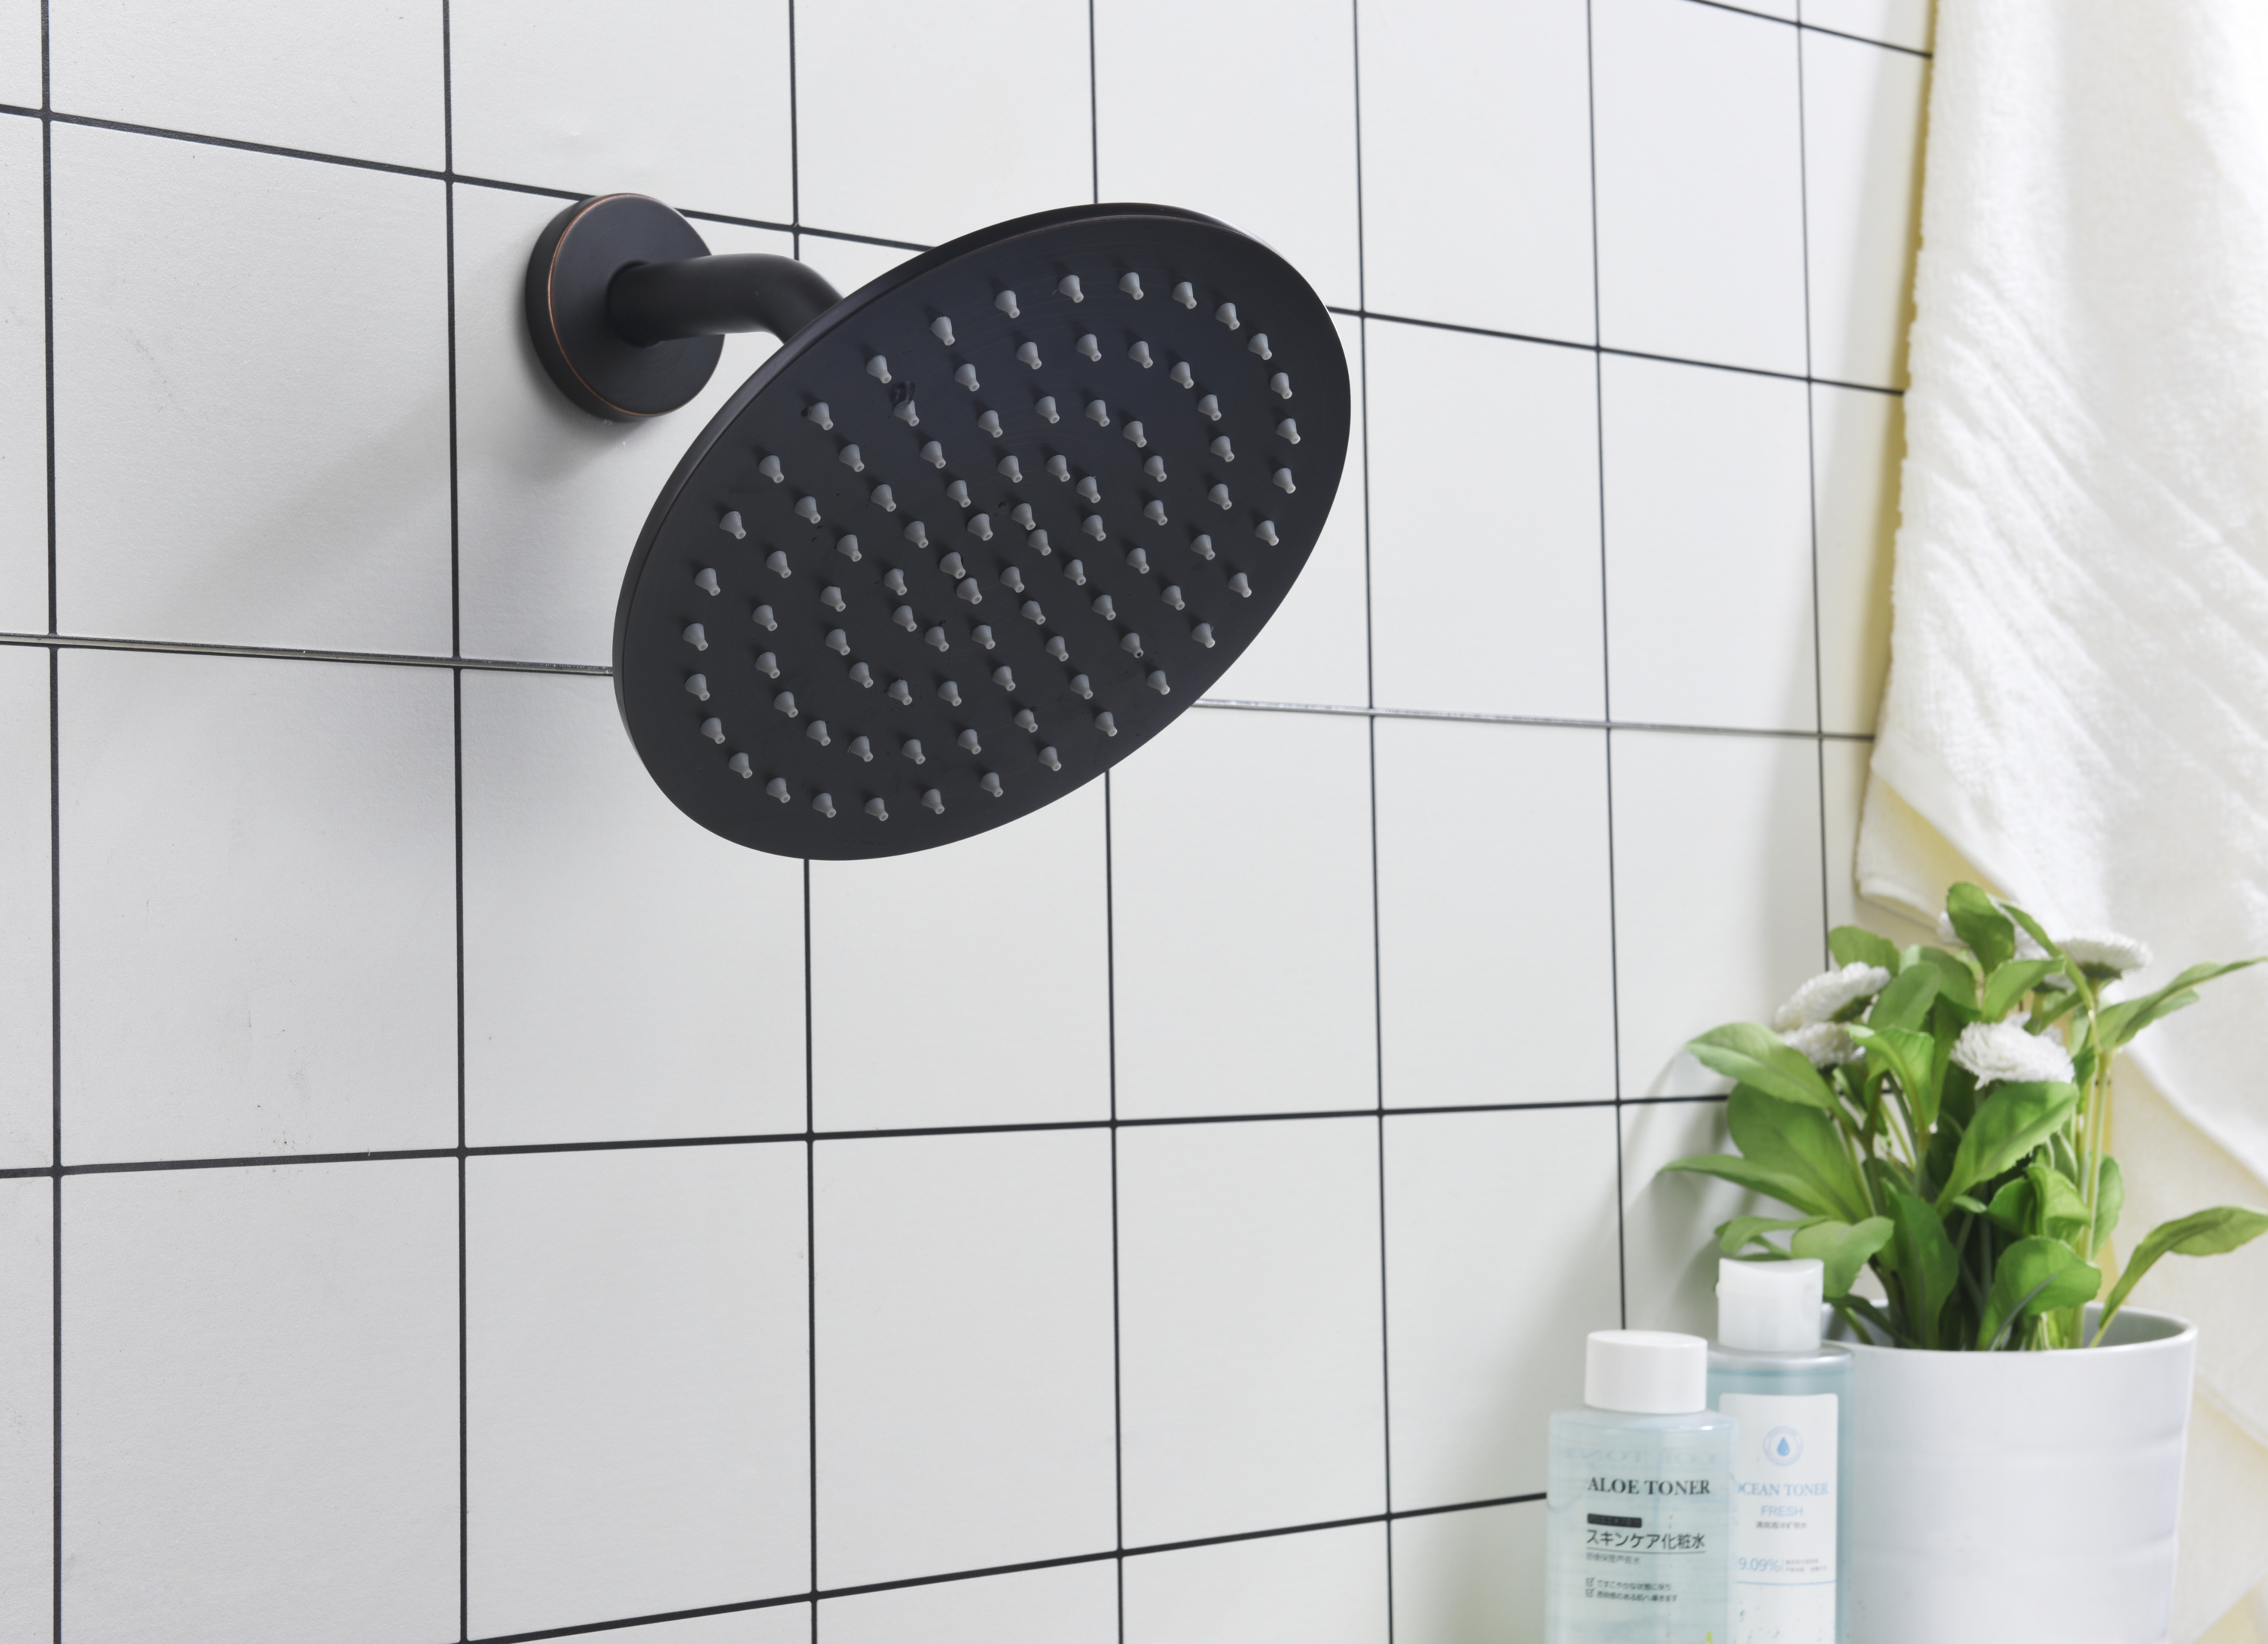 What to Know Before Installing a Rainfall Shower Head: Size Is Important